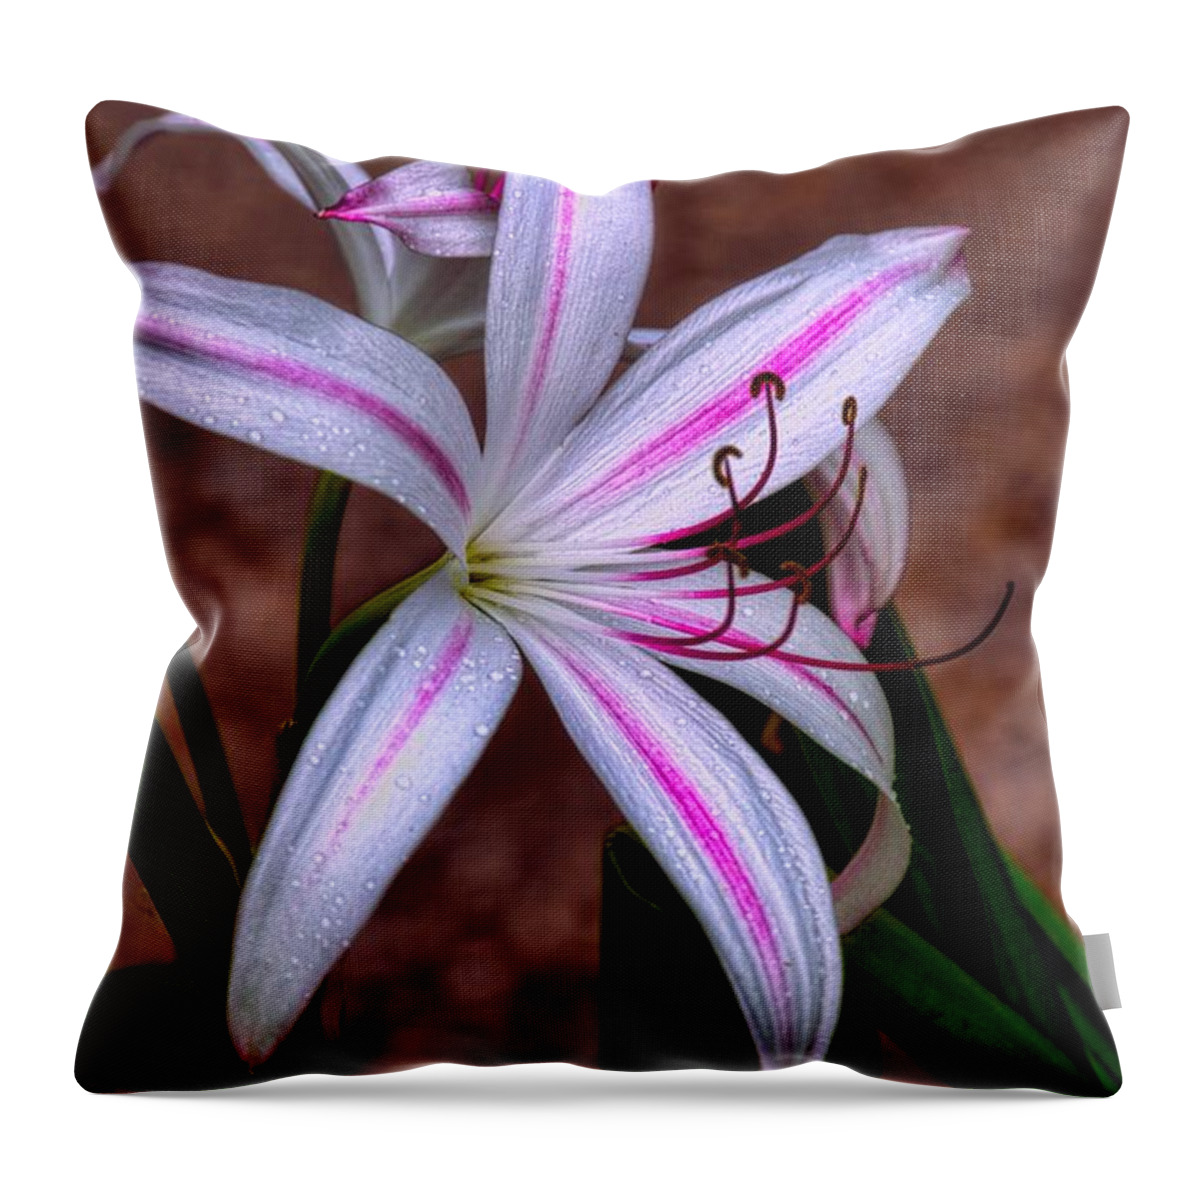 #dianamarysharptonphotography Throw Pillow featuring the photograph The Milk of Hera by Diana Mary Sharpton